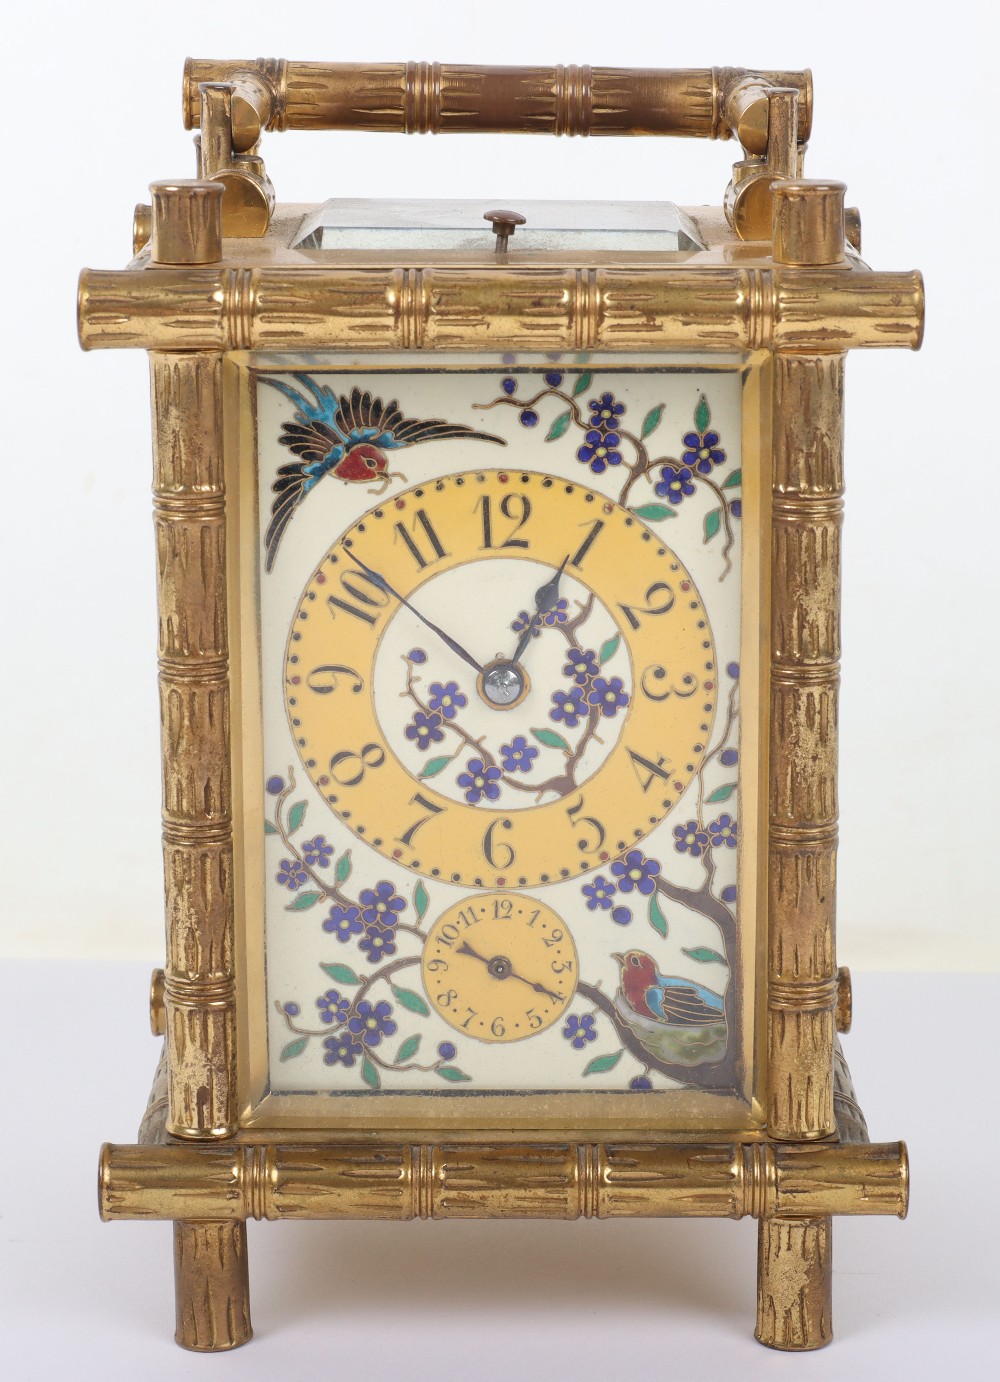 A fine 19th century gilt brass French Drocourt carriage clock with porcelain panel with cloisonne de